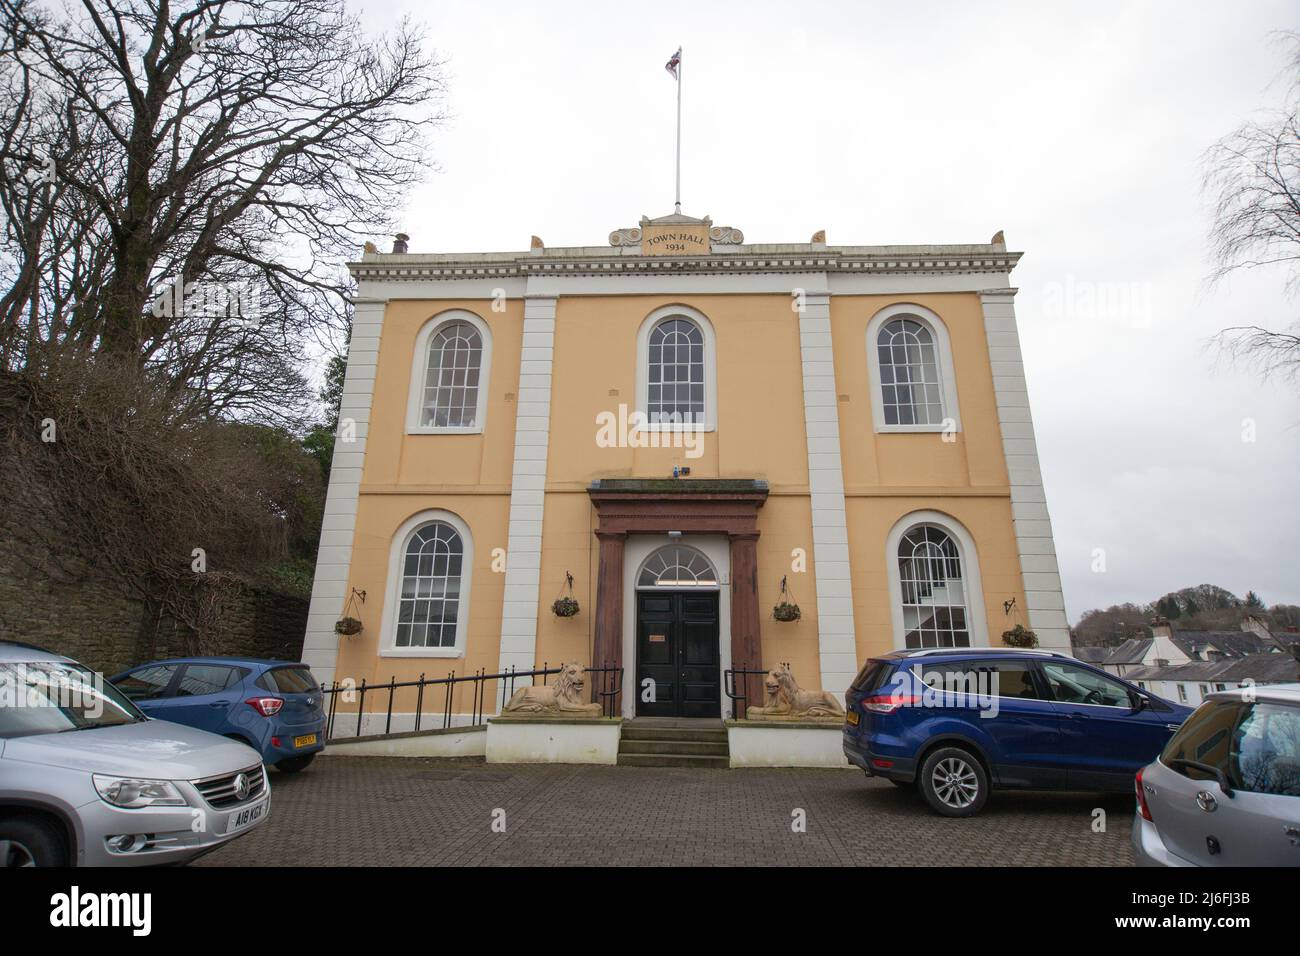 The Town Hall in Cockermouth, Cumbria in the UK Stock Photo